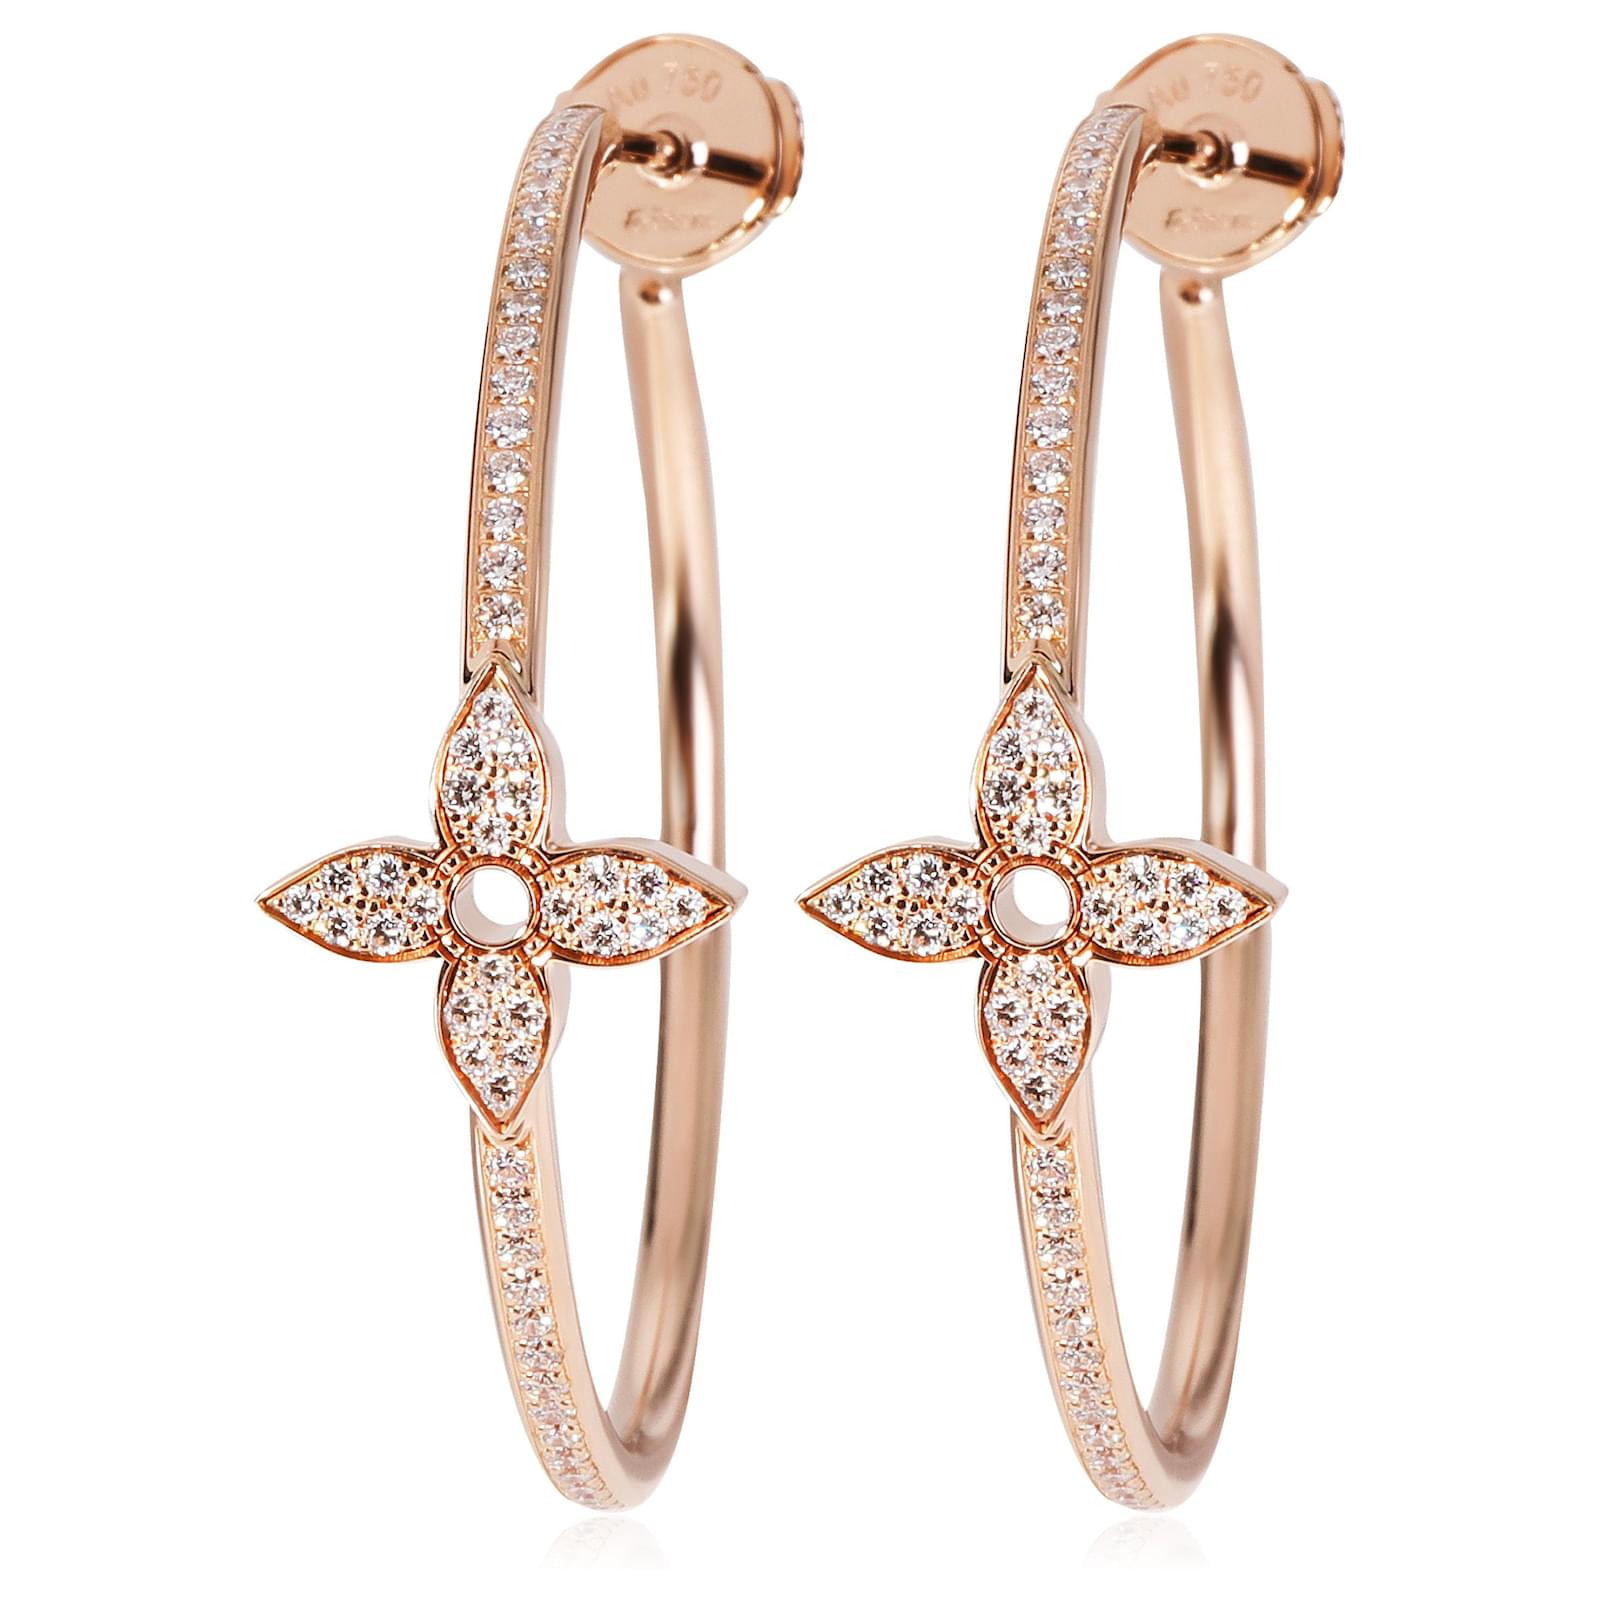 Idylle blossom pink gold earrings Louis Vuitton Pink in Pink gold